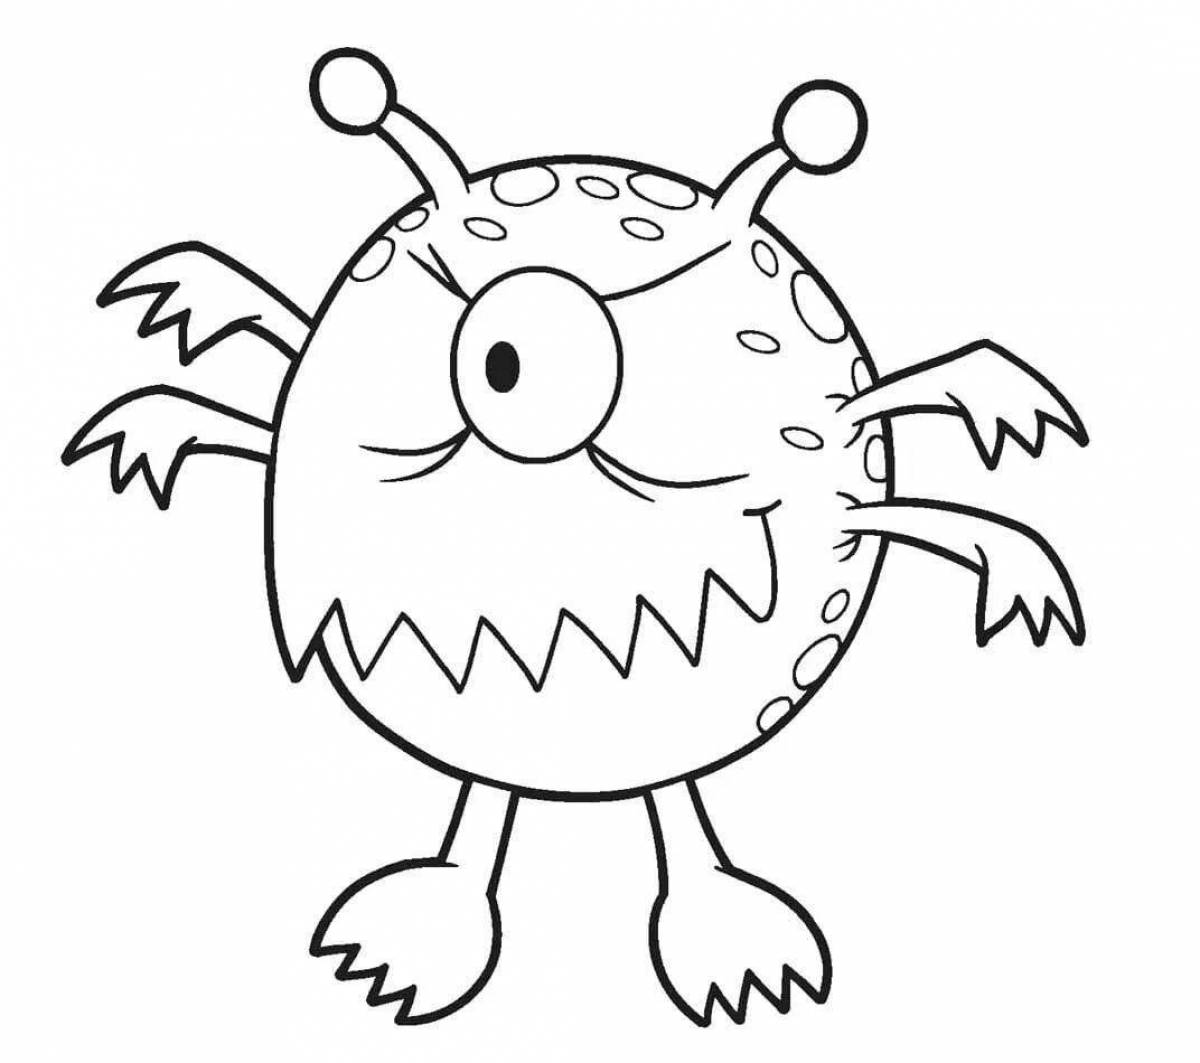 Snuggly coloring page monsters baby